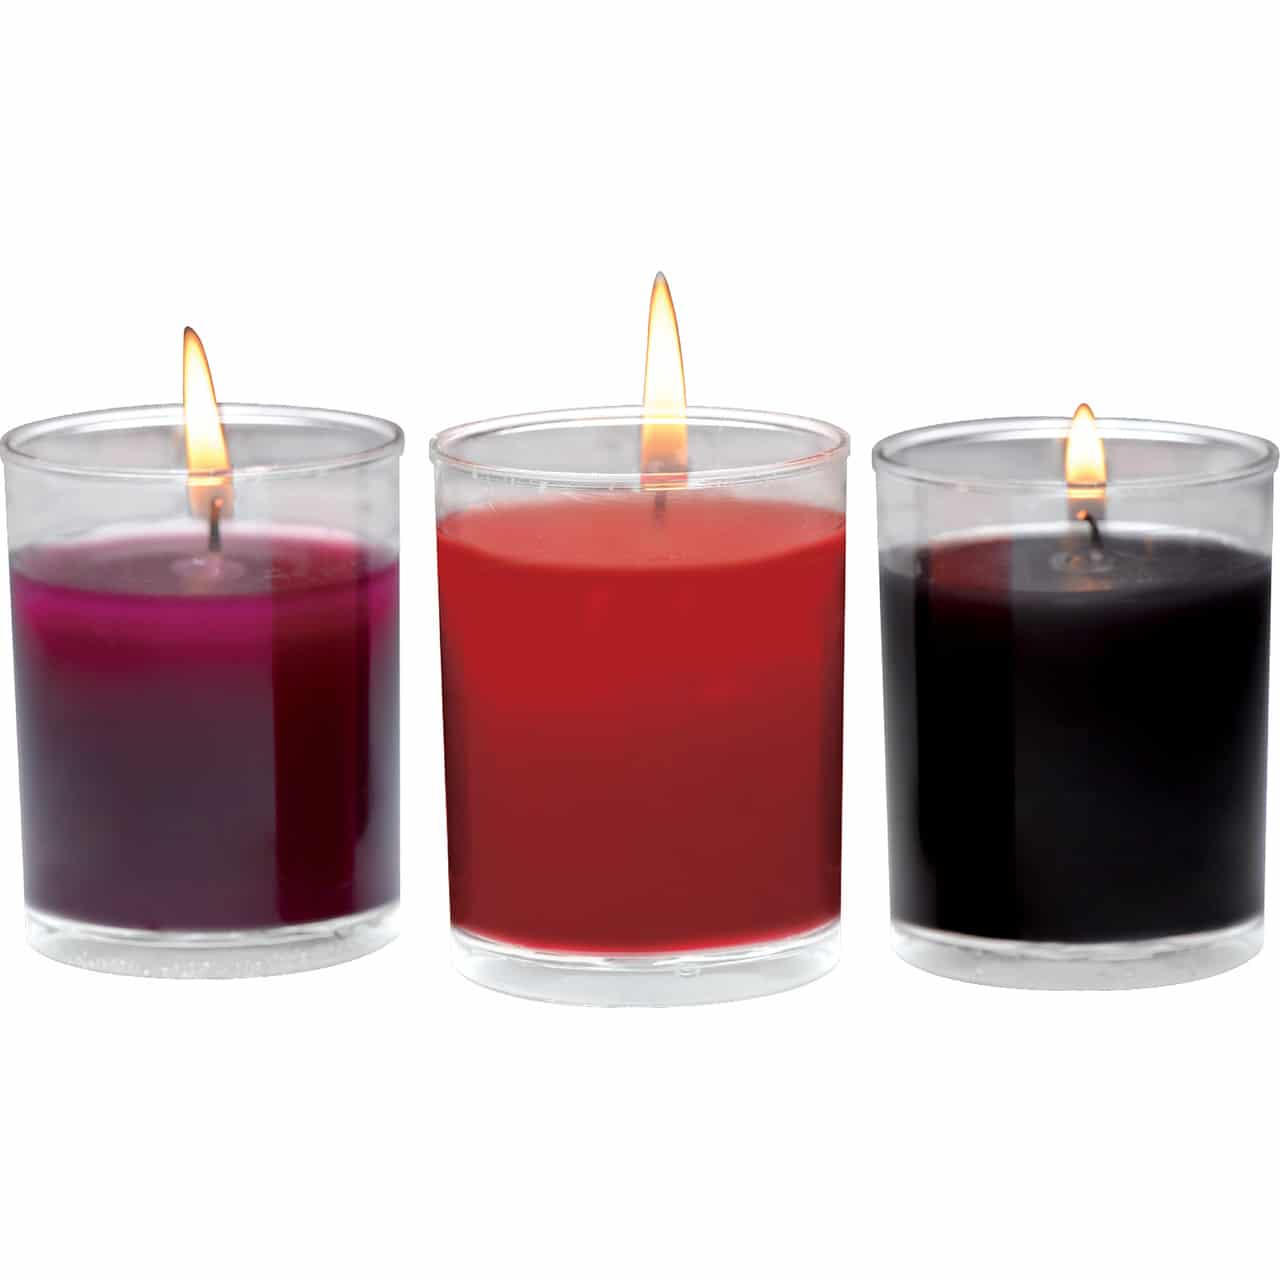 Flame Drippers Wax Play Candle Set. Slide 2